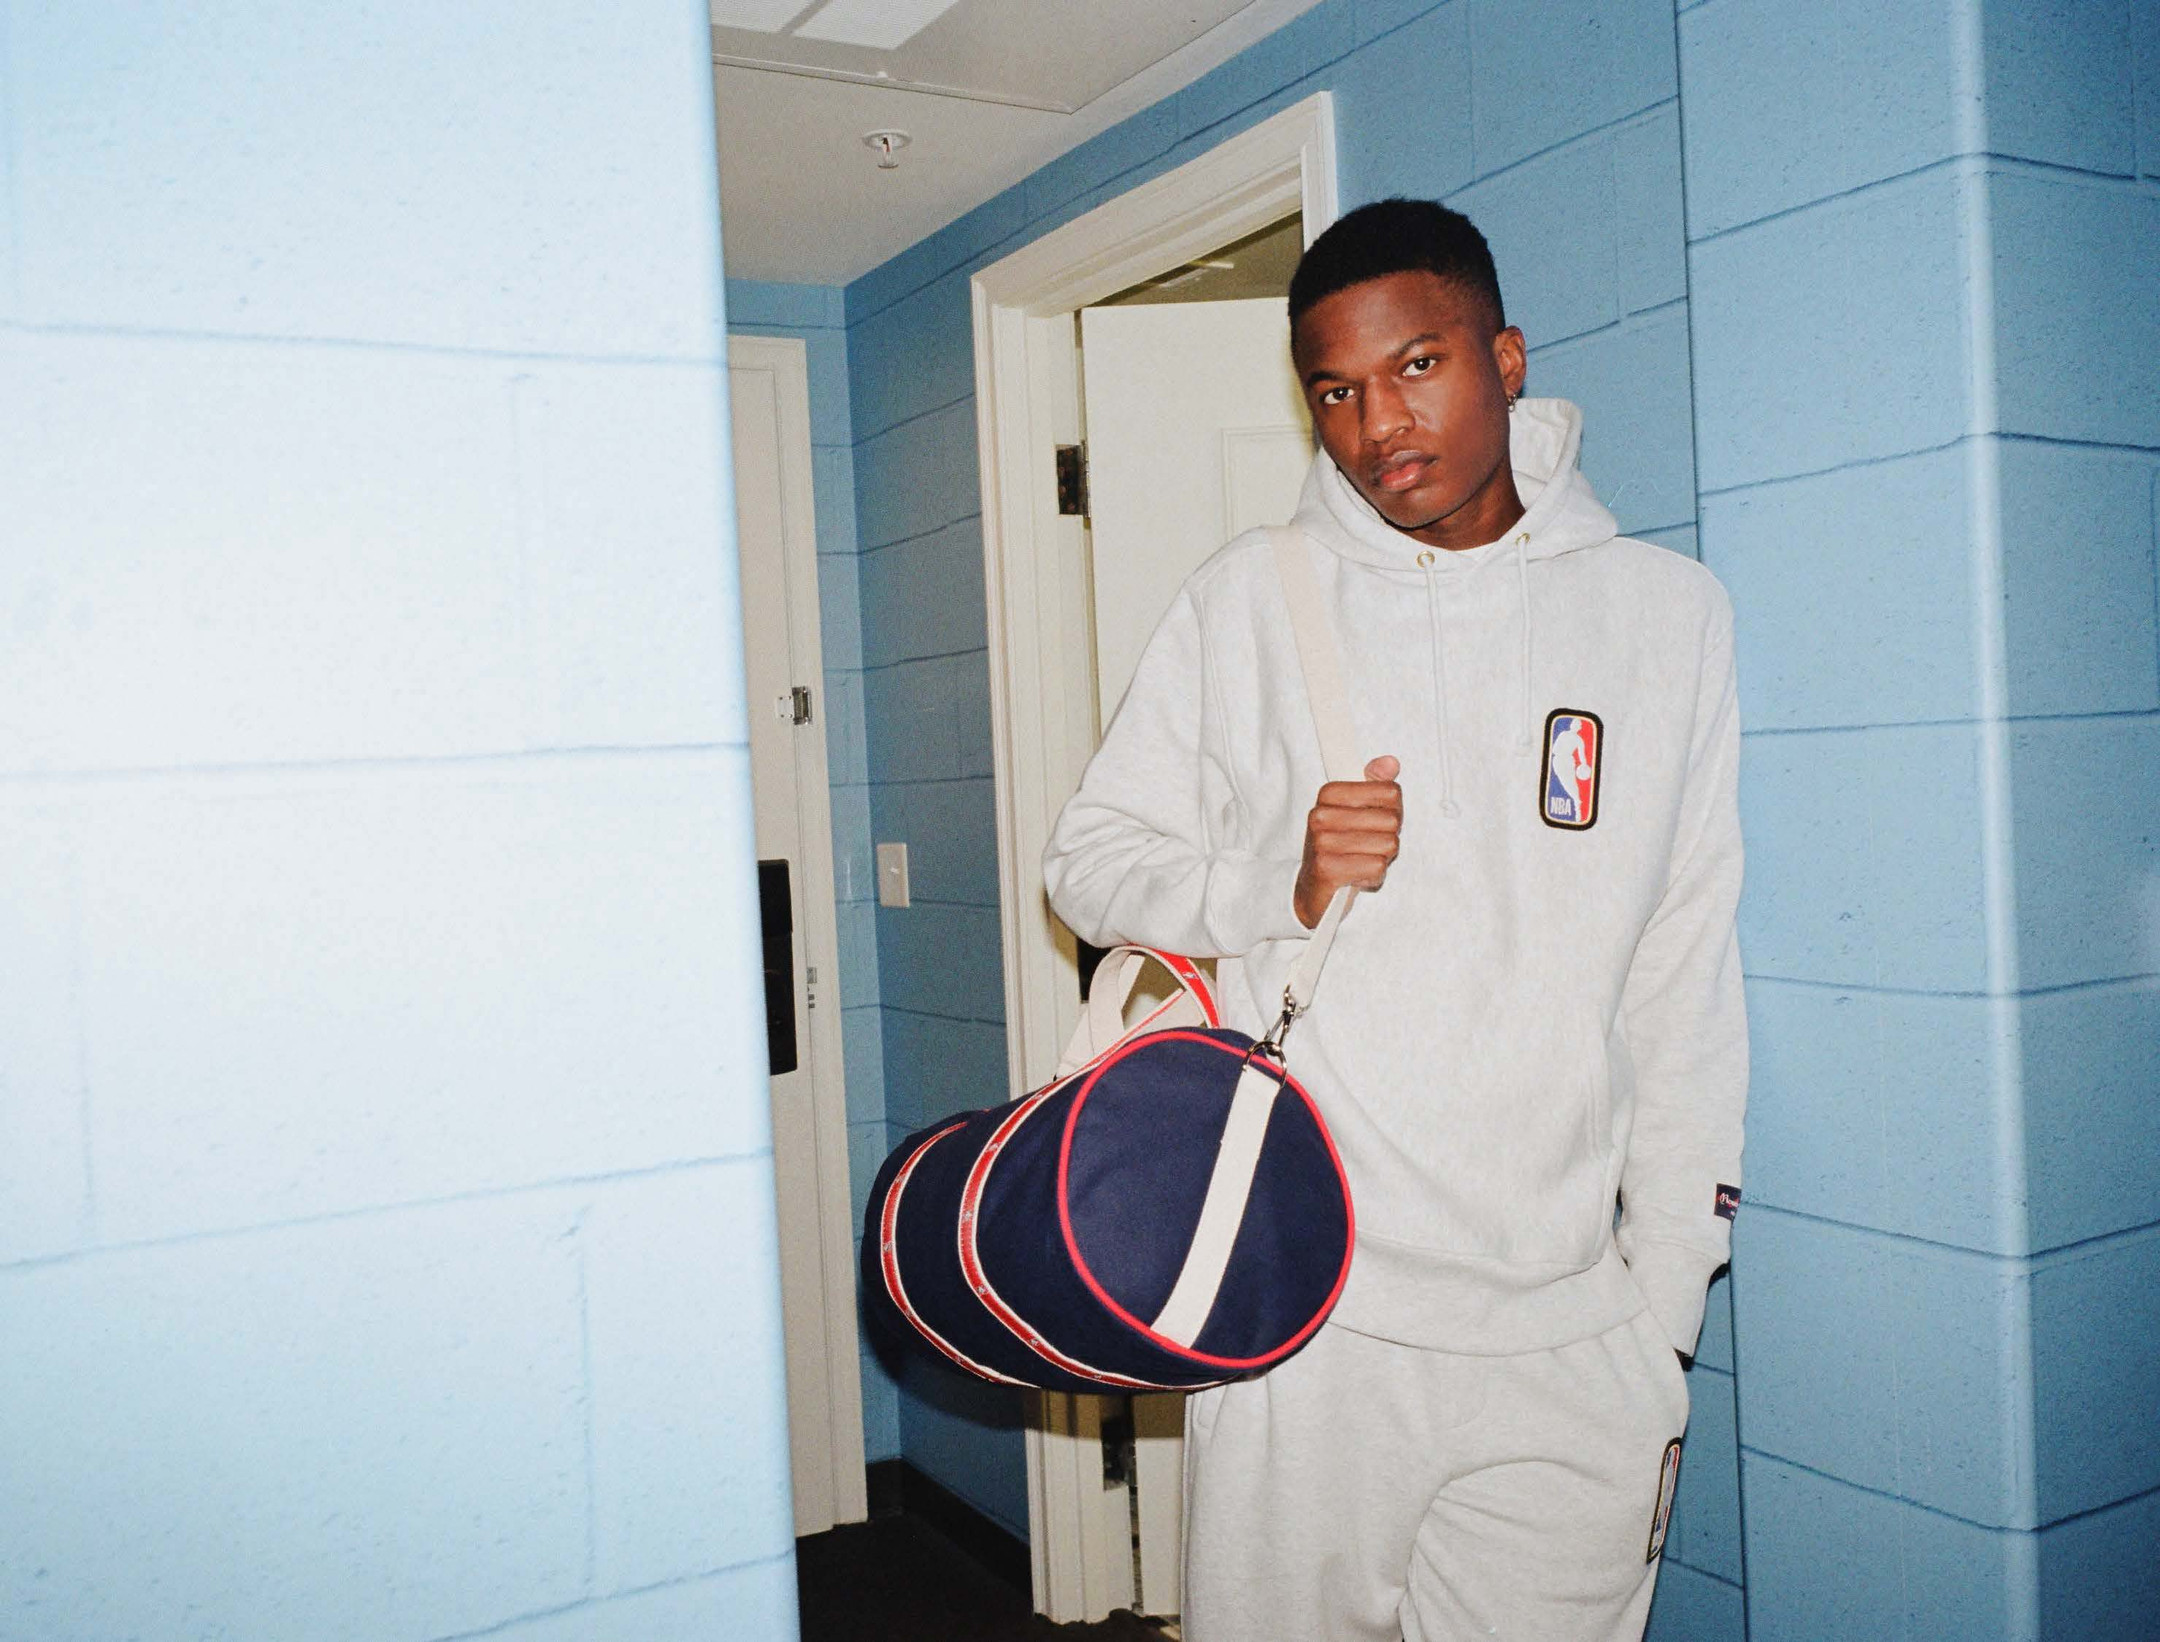 Rowing Blazers x NBA Second Collection Release